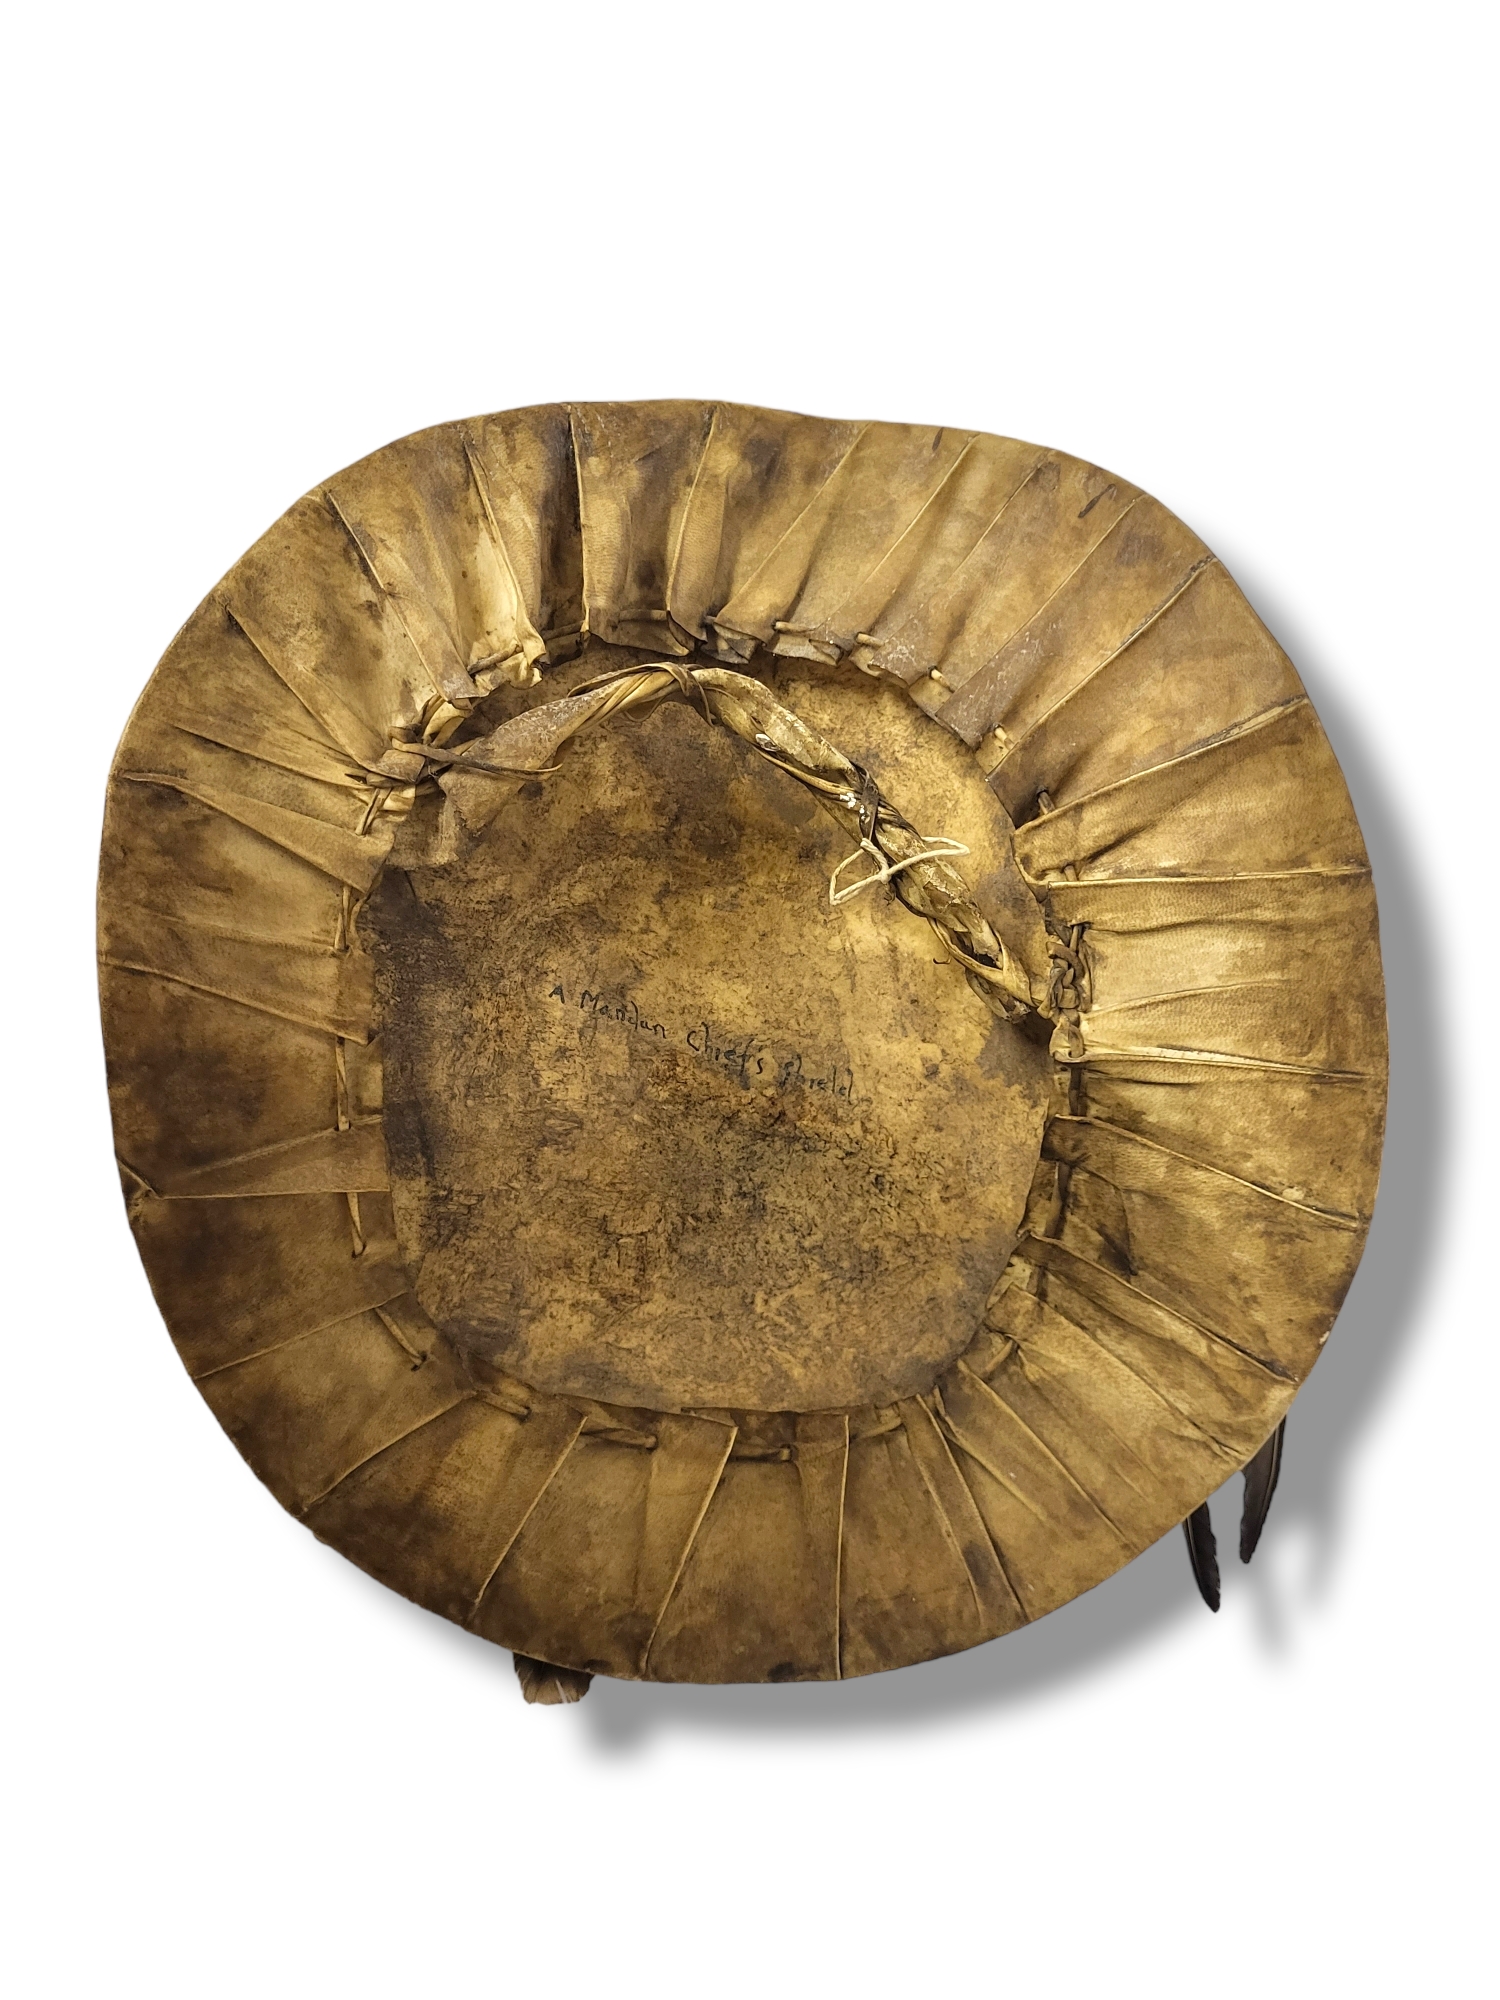 AN ANTIQUE NATIVE AMERICAN INDIAN ANIMAL SKIN 'MANDAN CHIEF' CIRCULAR SHIELD With hand painted - Image 5 of 6